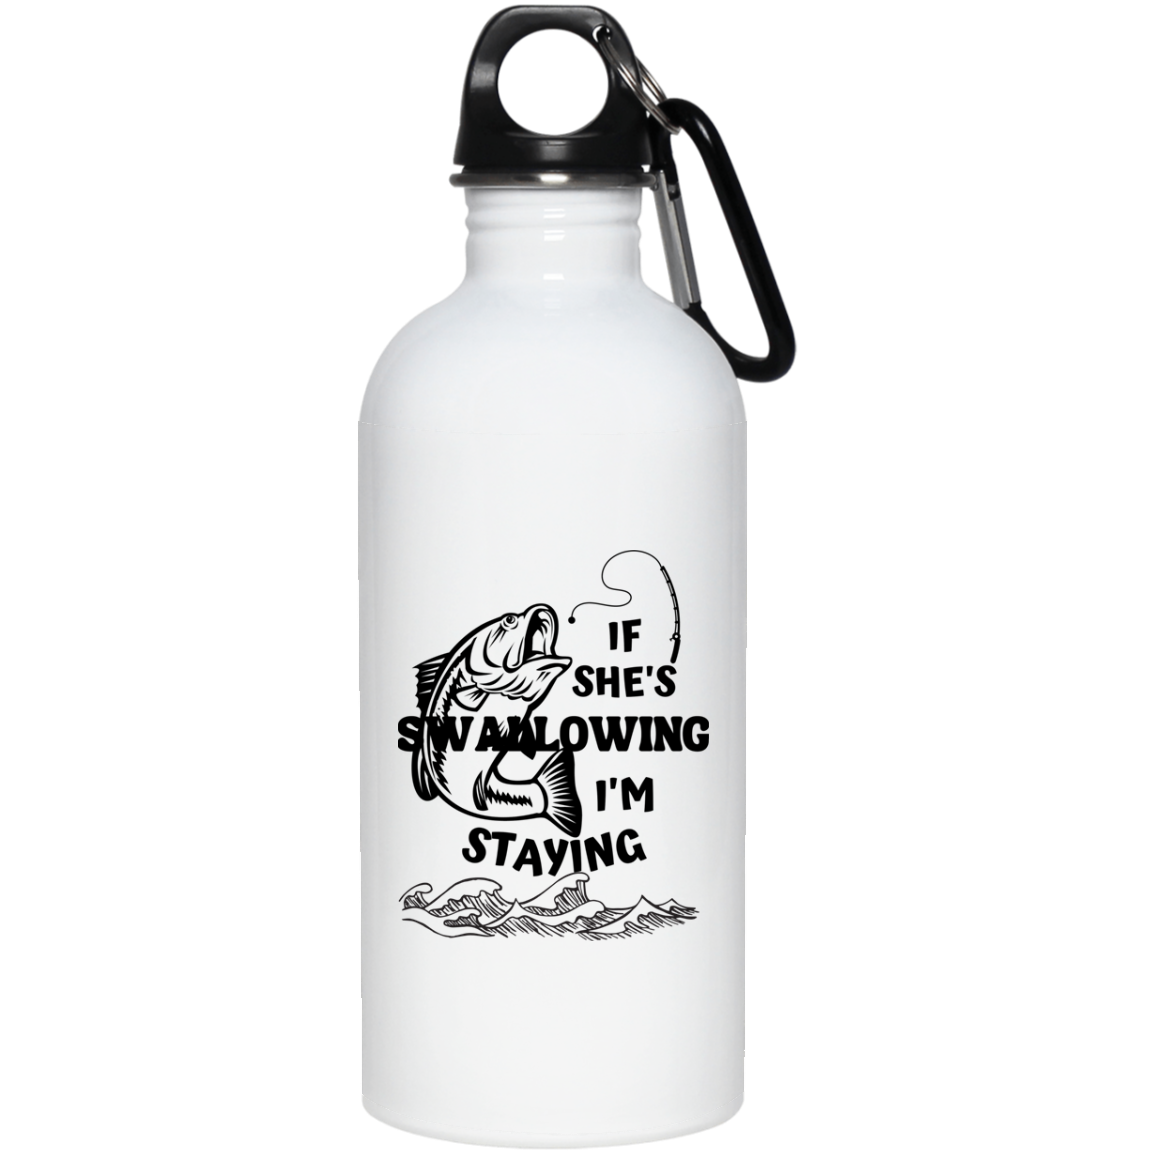 IF SHE'S SWALLOWING  20 oz. Stainless Steel Water Bottle